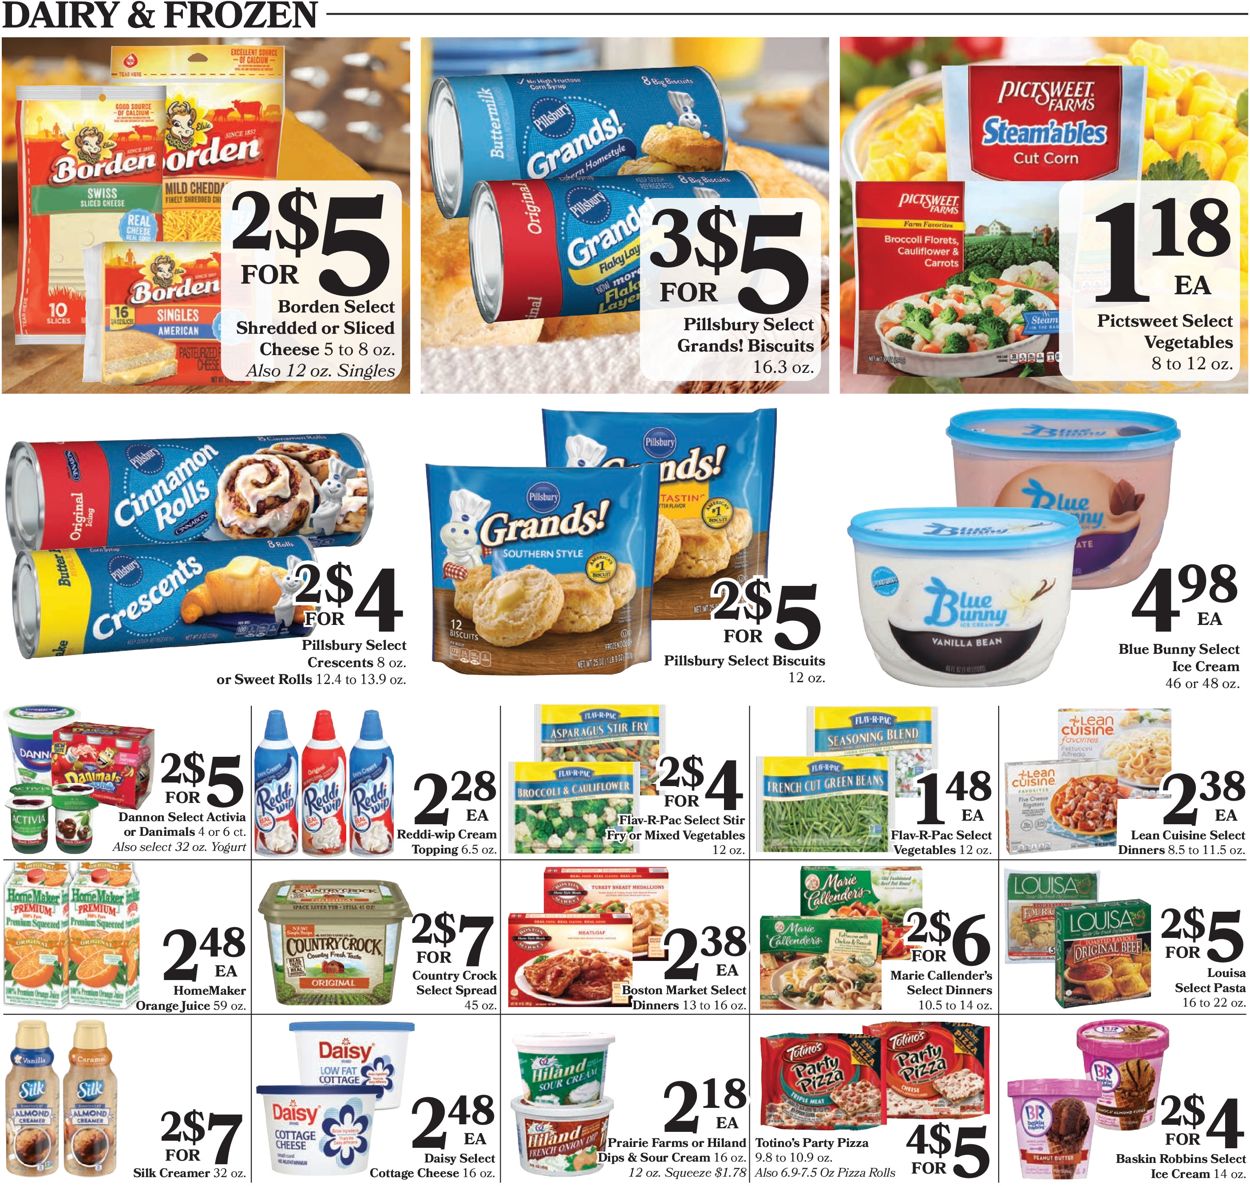 Harps Foods Ad from 10/21/2020